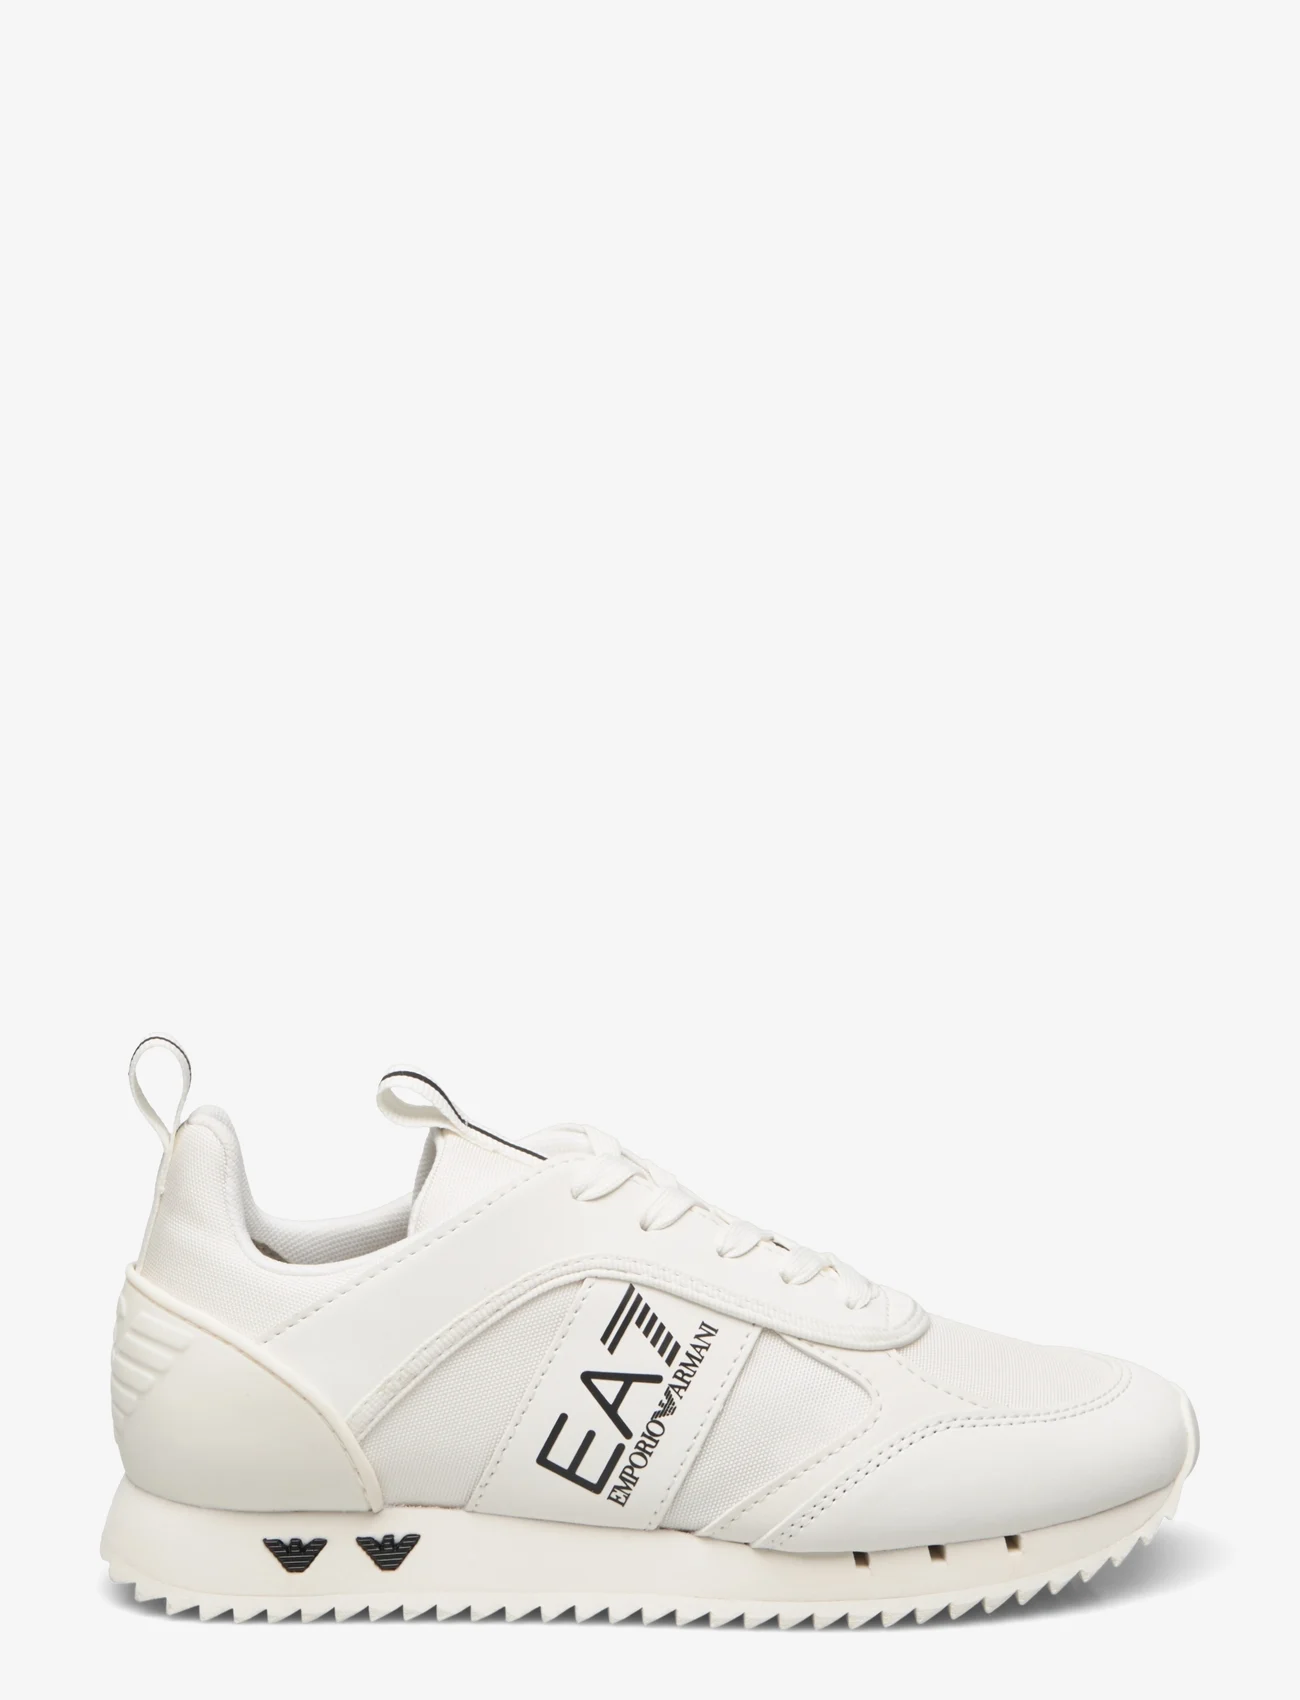 EA7 - SNEAKERS - low tops - t052-off white+black - 1